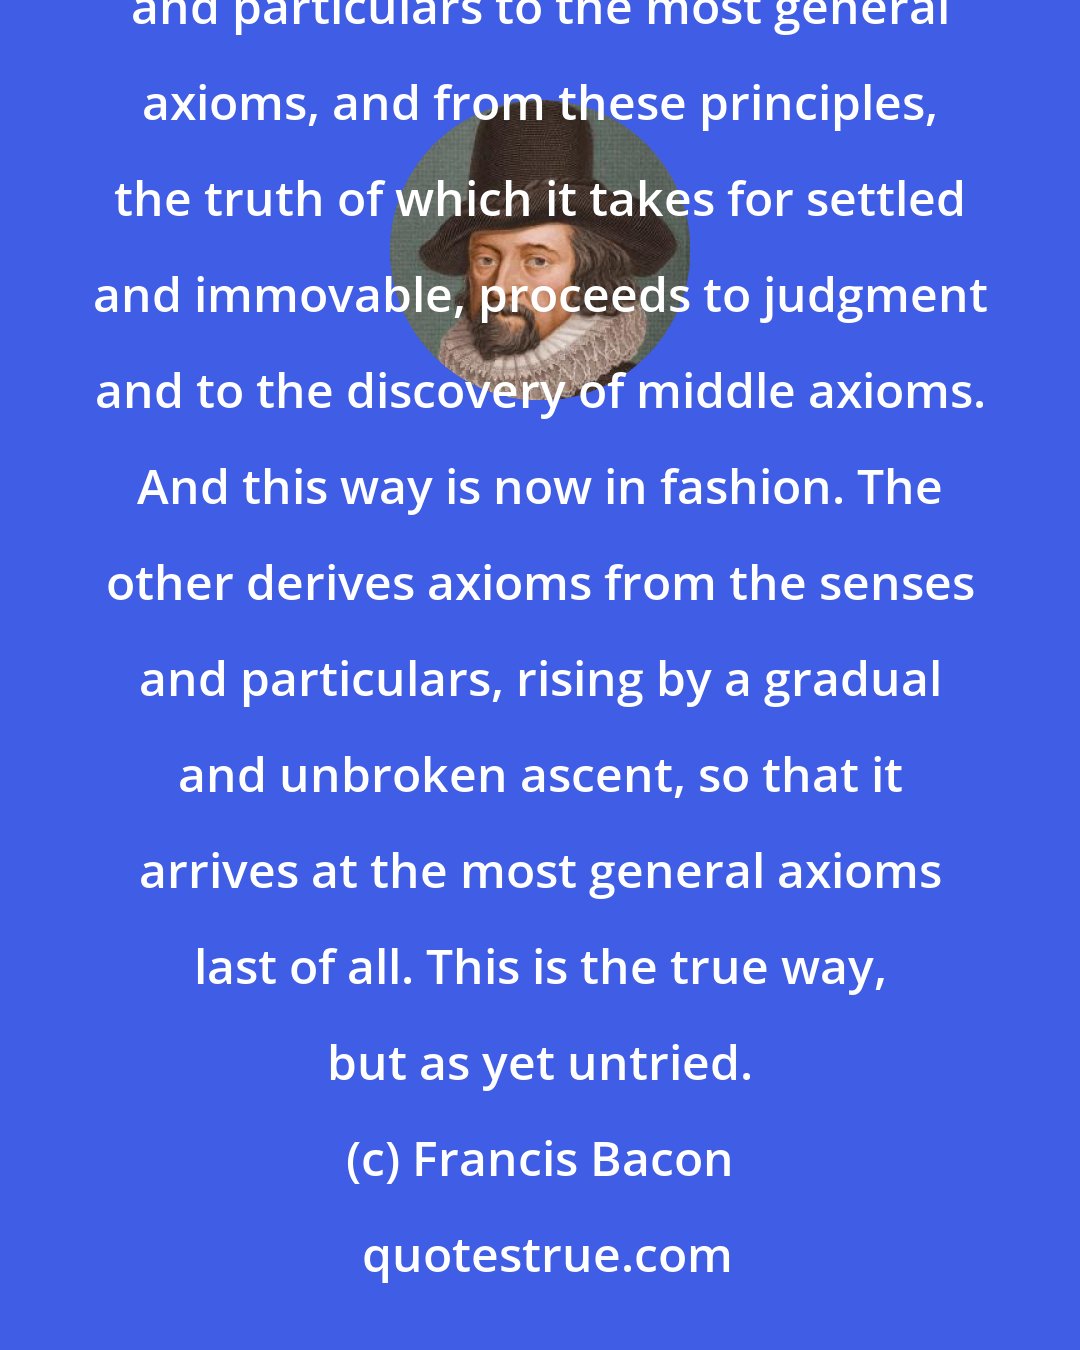 Francis Bacon: There are and can be only two ways of searching into and discovering truth. The one flies from the senses and particulars to the most general axioms, and from these principles, the truth of which it takes for settled and immovable, proceeds to judgment and to the discovery of middle axioms. And this way is now in fashion. The other derives axioms from the senses and particulars, rising by a gradual and unbroken ascent, so that it arrives at the most general axioms last of all. This is the true way, but as yet untried.